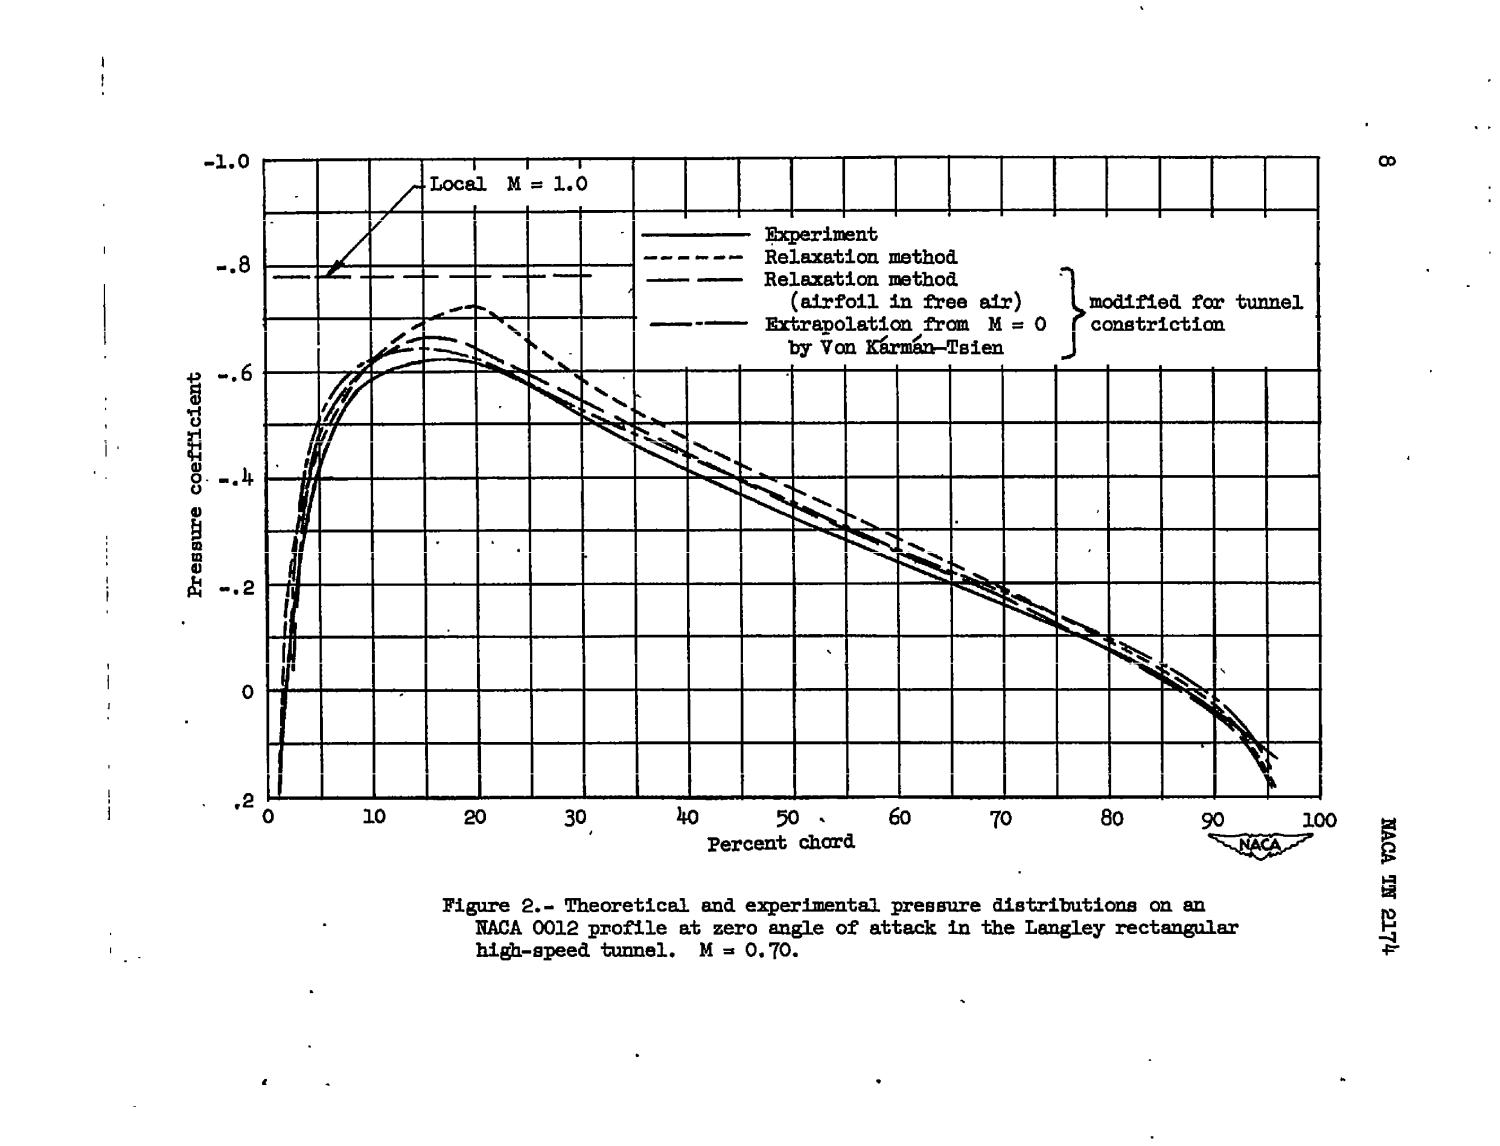 Comparison of the Experimental Pressure Distribution on an NACA 0012 ...